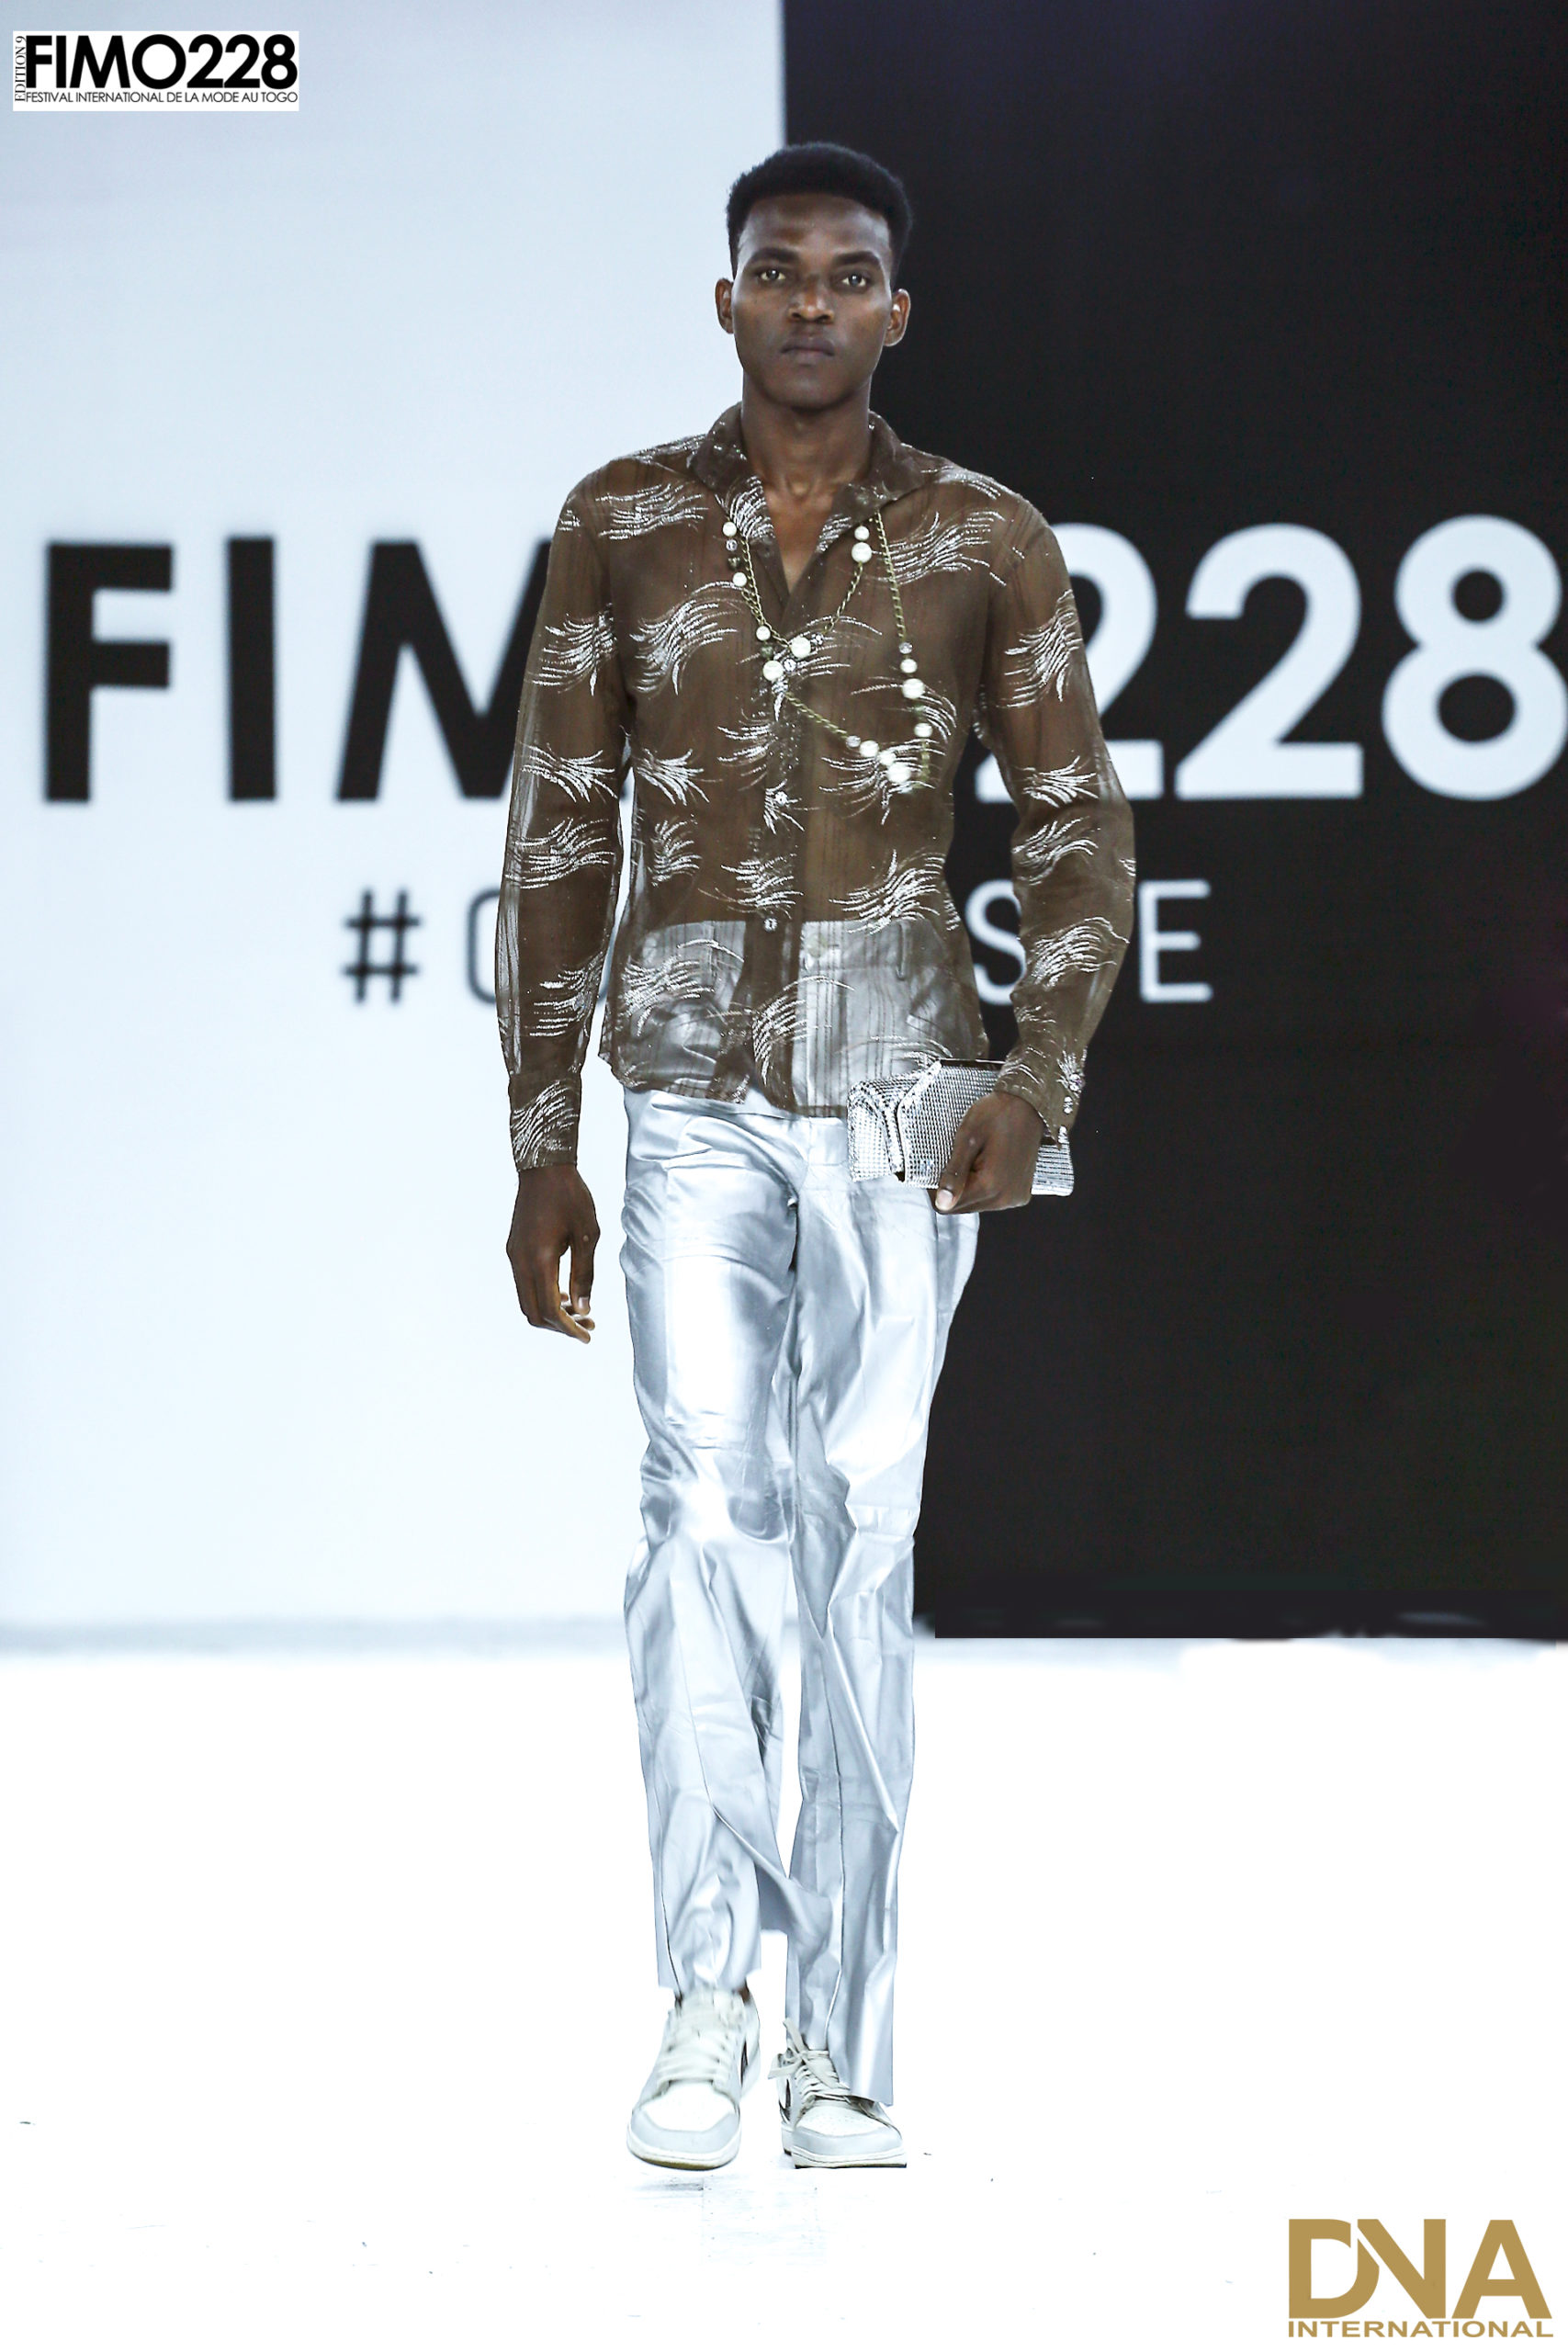 FIMO-228-Edition-DAY-1-Young-Designer--M.A.N.-Collection-It’s-time-to-shiiiiine-by-Michelle-Ange-Nacto-MD0A0396